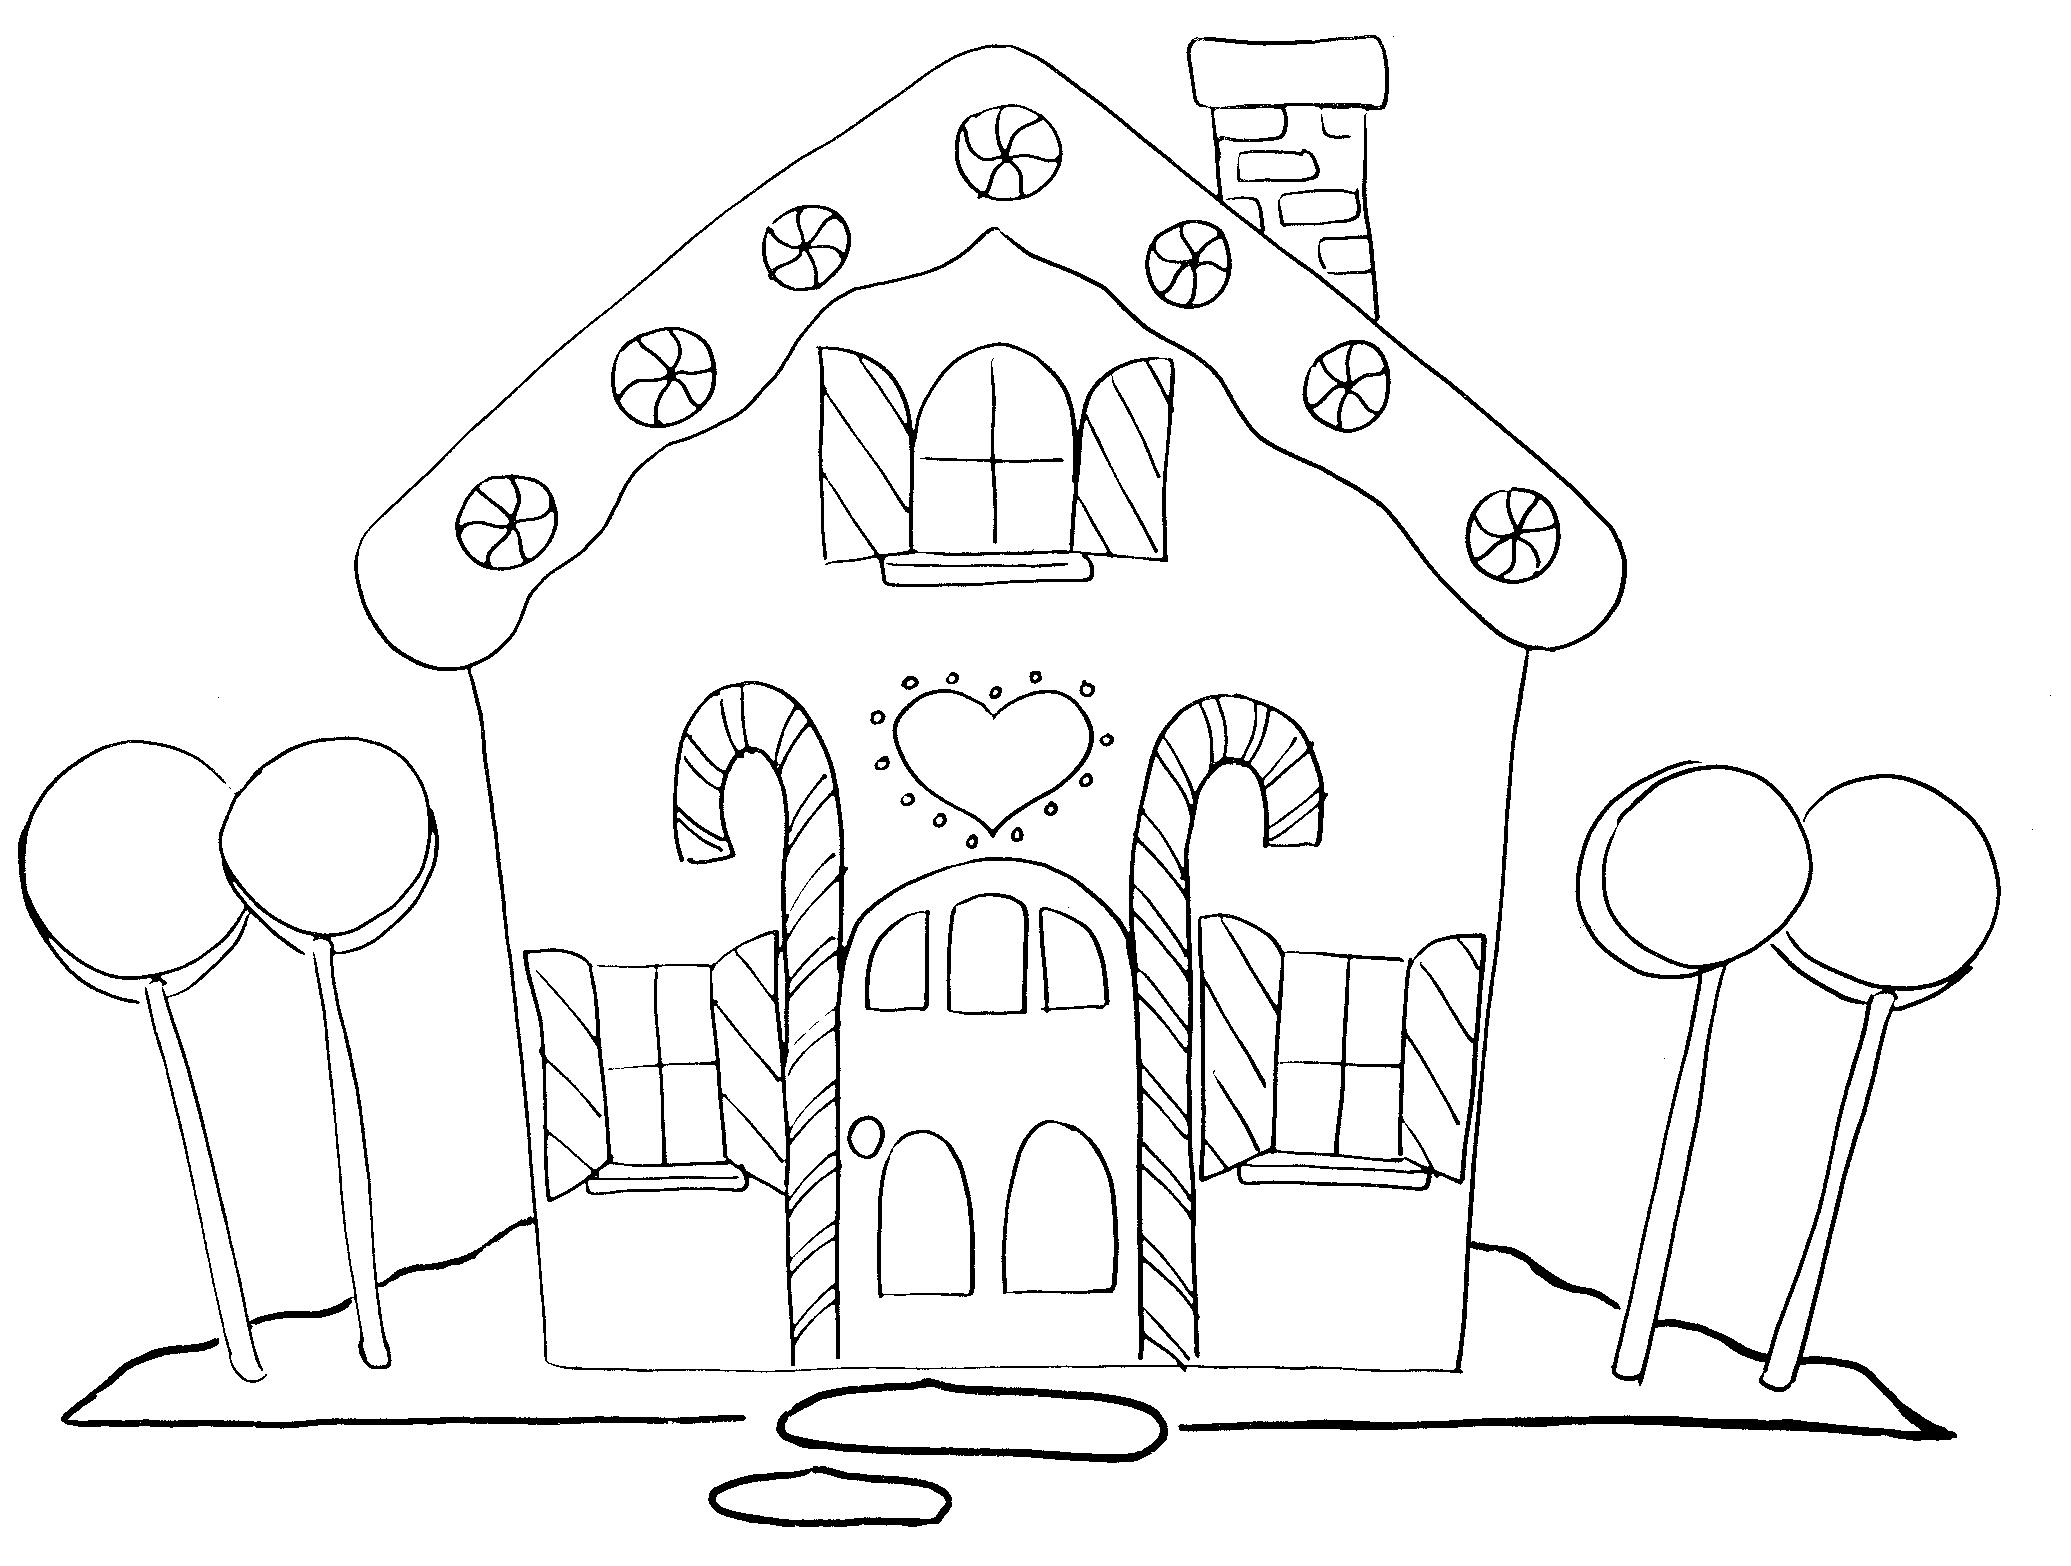 blank gingerbread house coloring pages